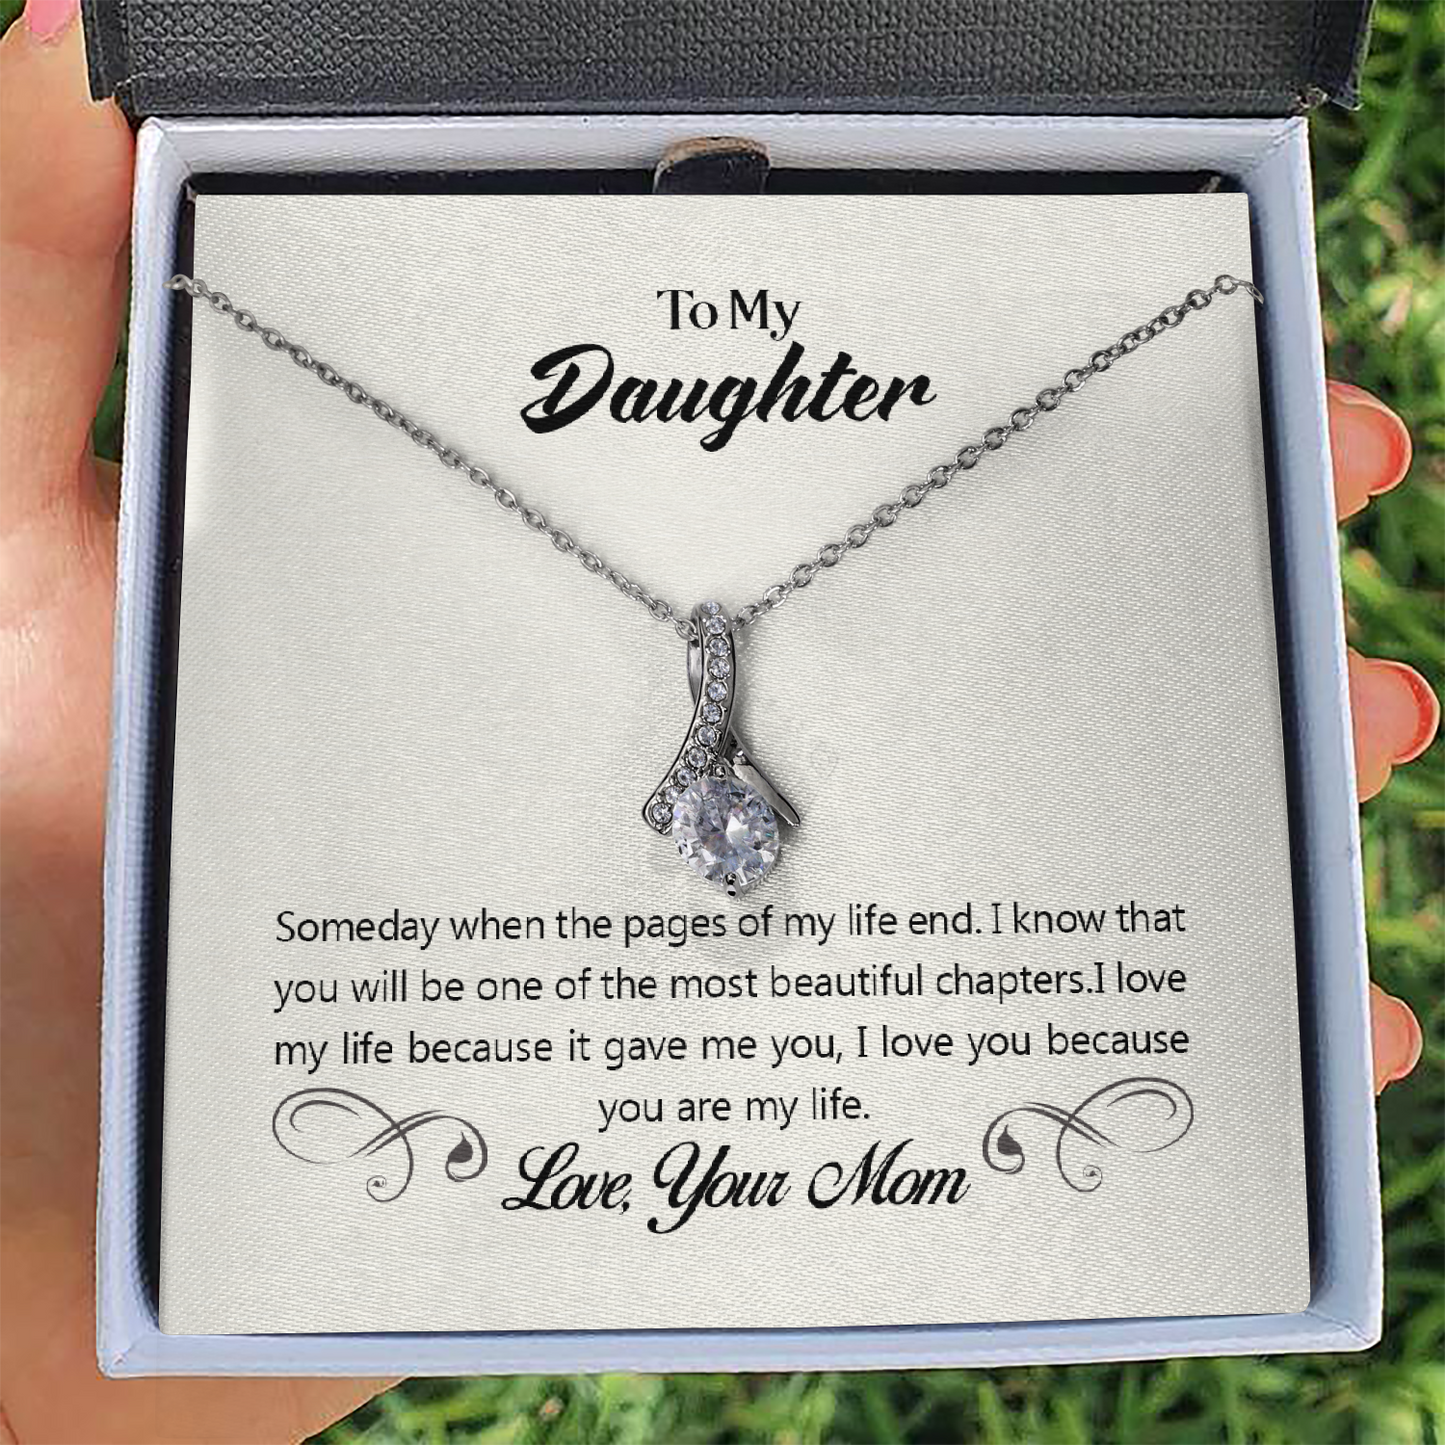 To My Daughter - Alluring Beauty Necklace